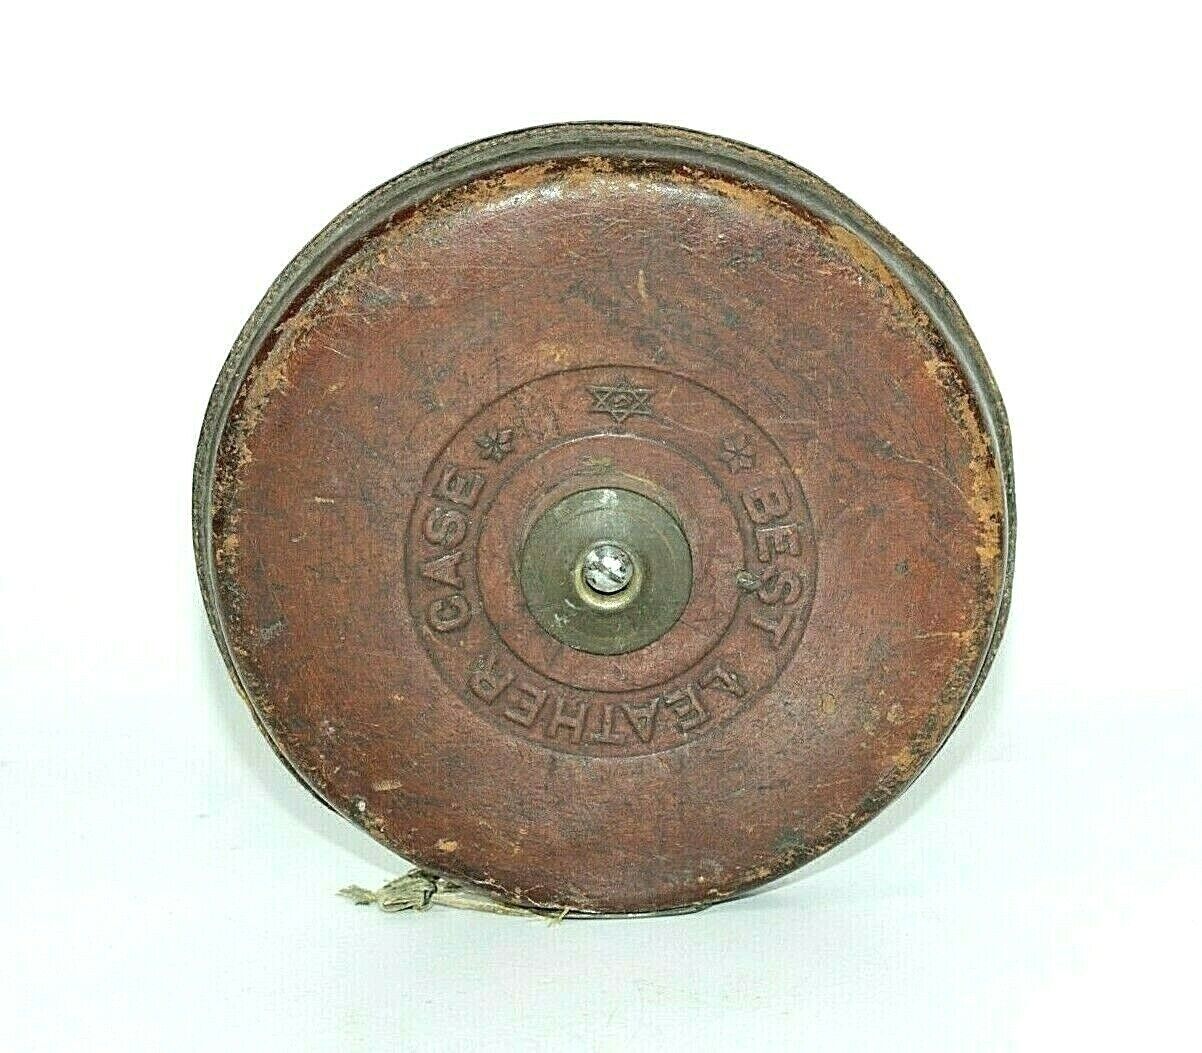 Antique Best Leather Case Weather Fast Measuring Tape 20M JDEAL English Made